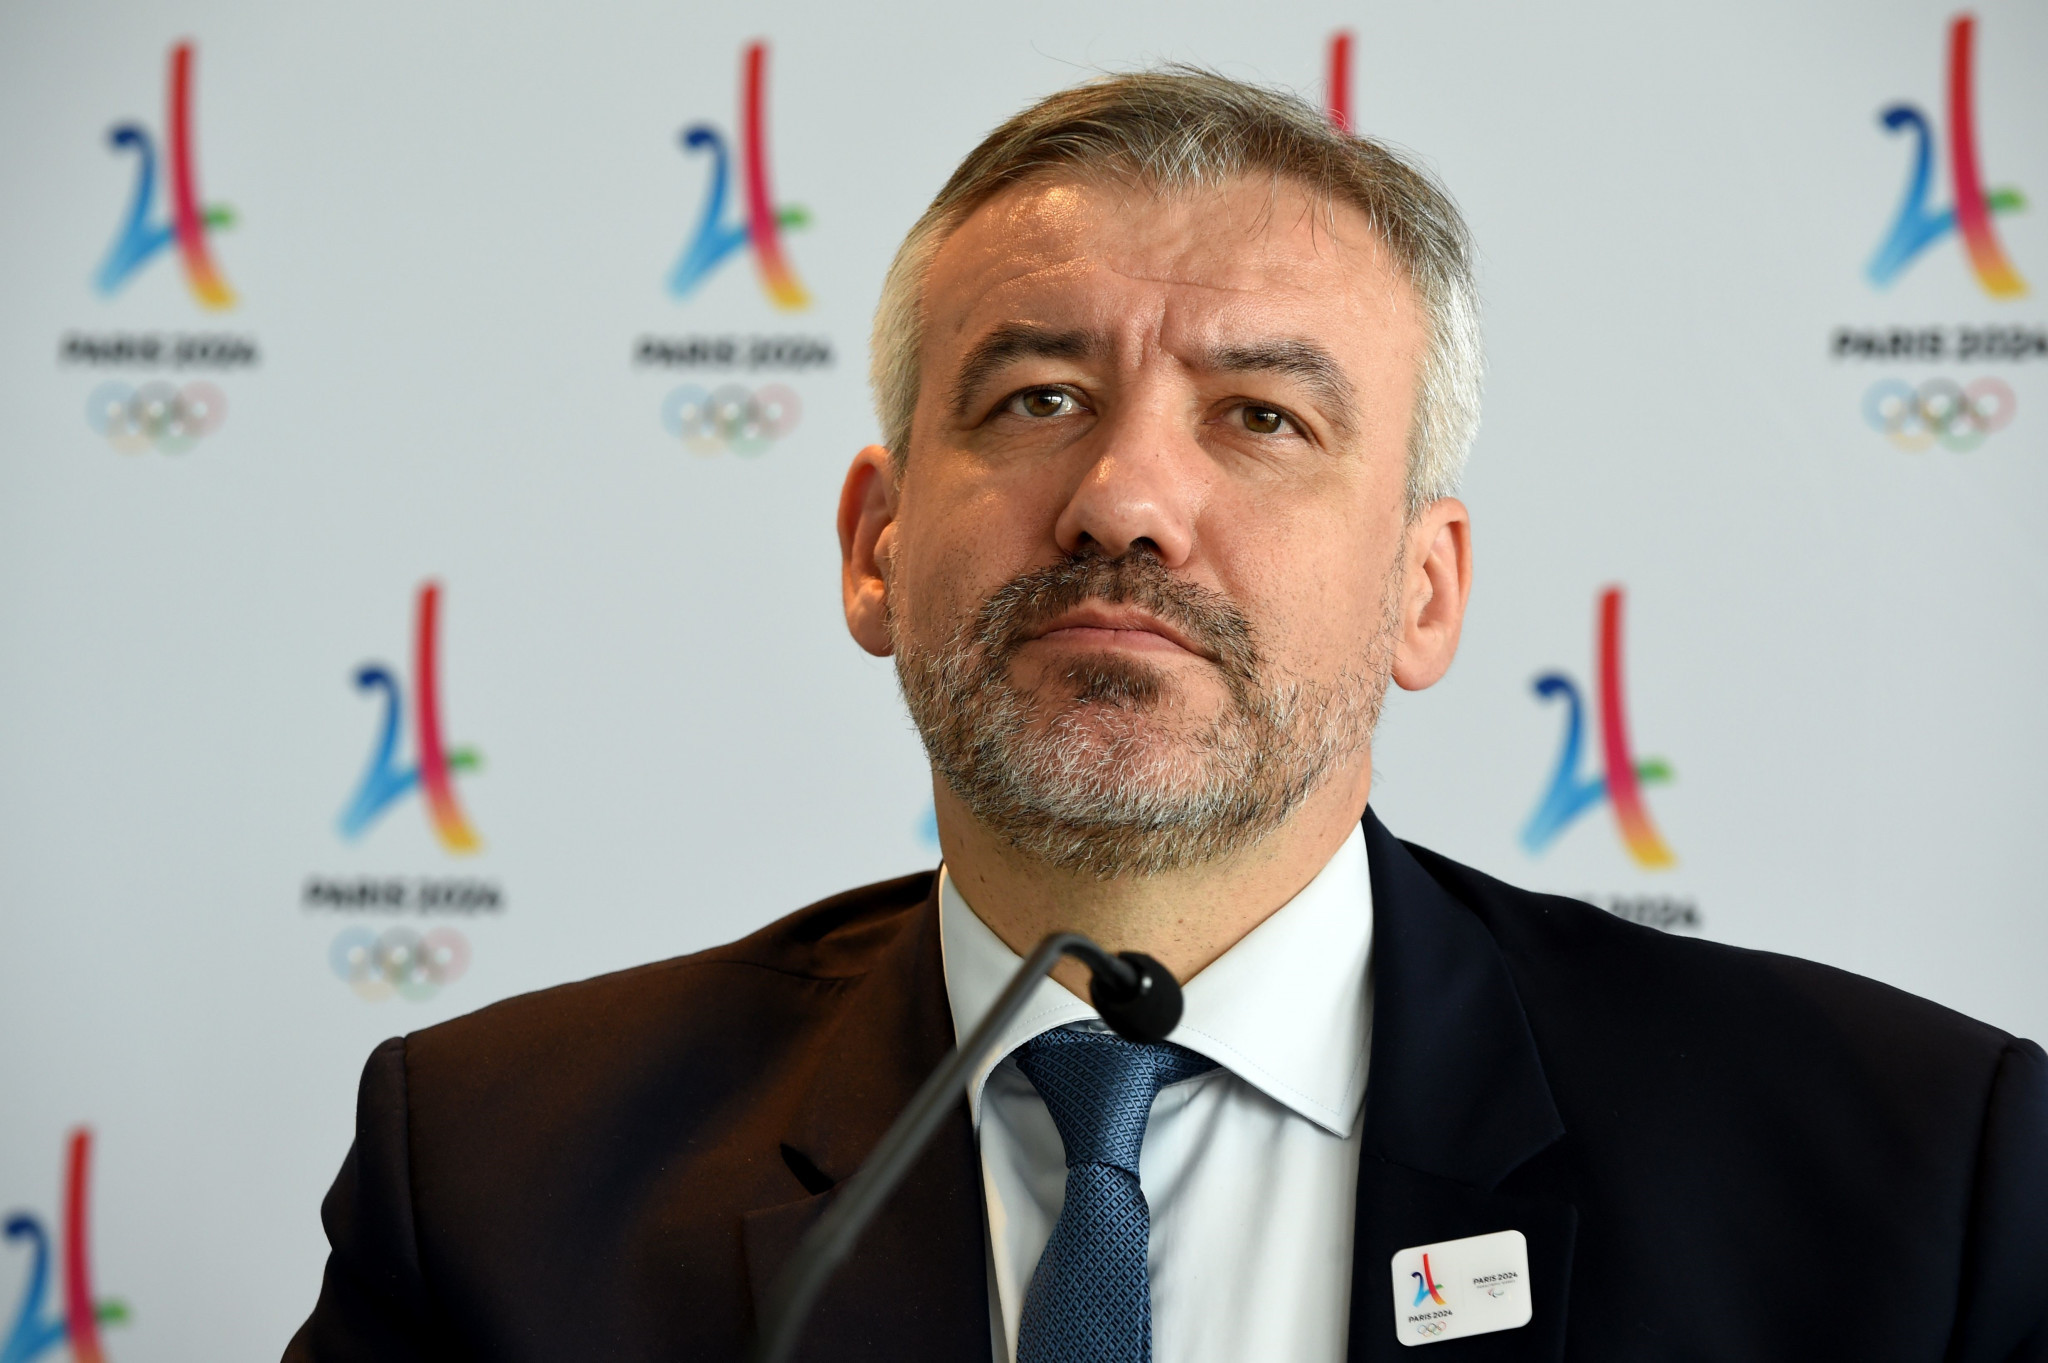 Paris 2024 chief executive Etienne Thobois is due to speak at the Host City conference ©Getty Images